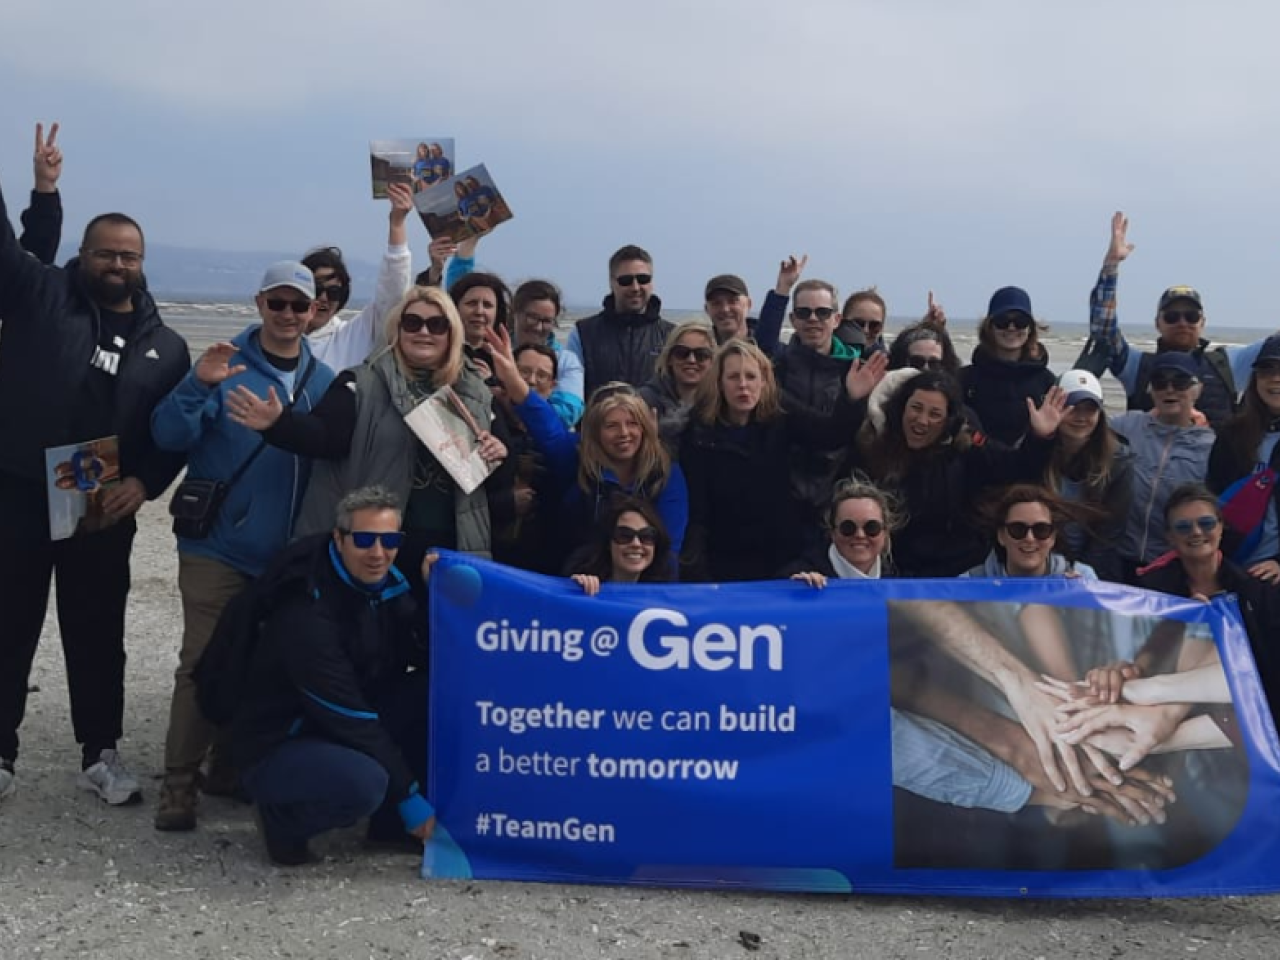 A group of people cheering on a beach, the front row holding a sign "Giving @ Gen".